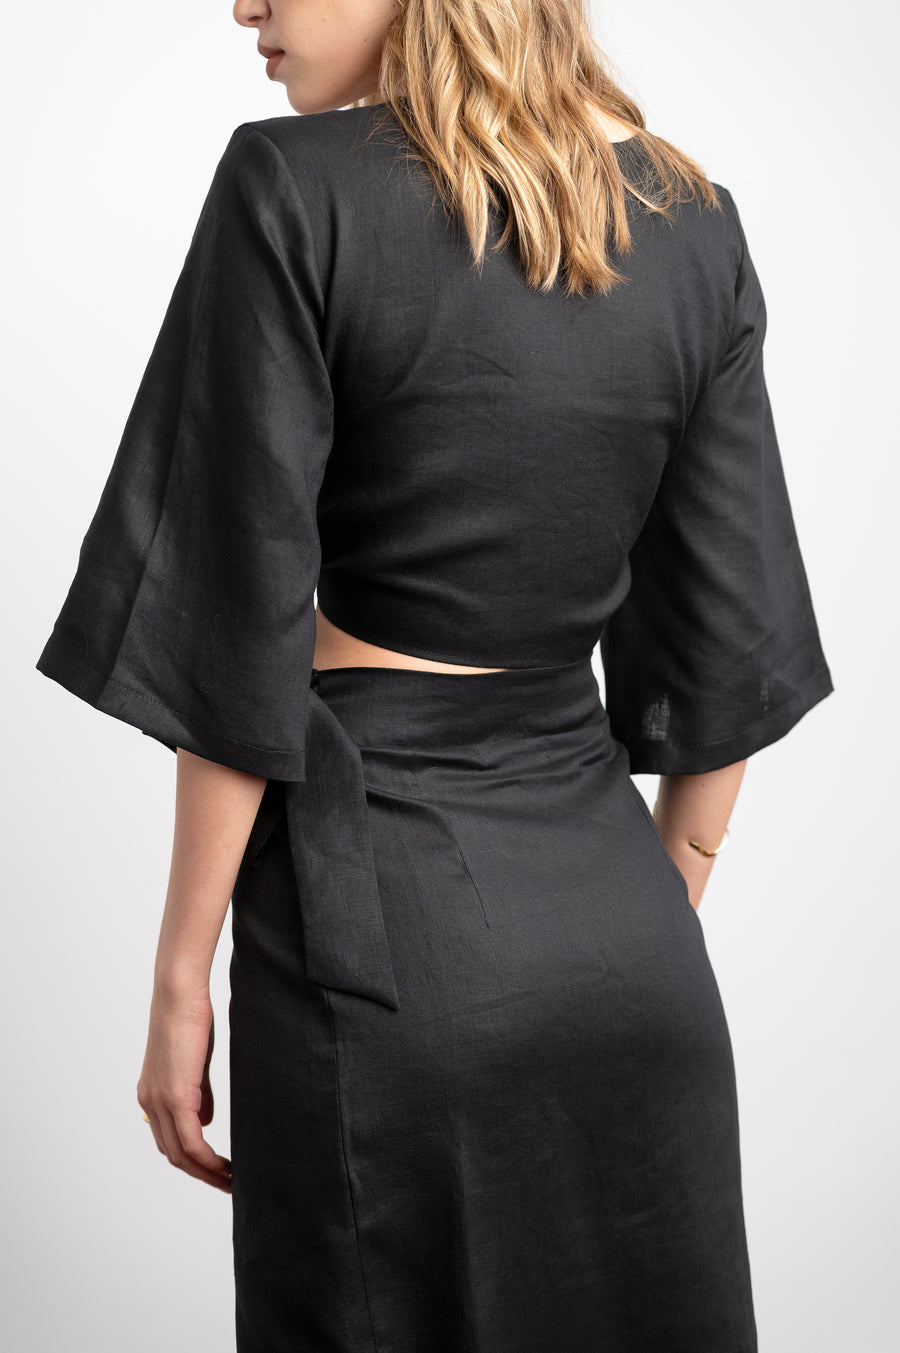 The Wrap Top in Black